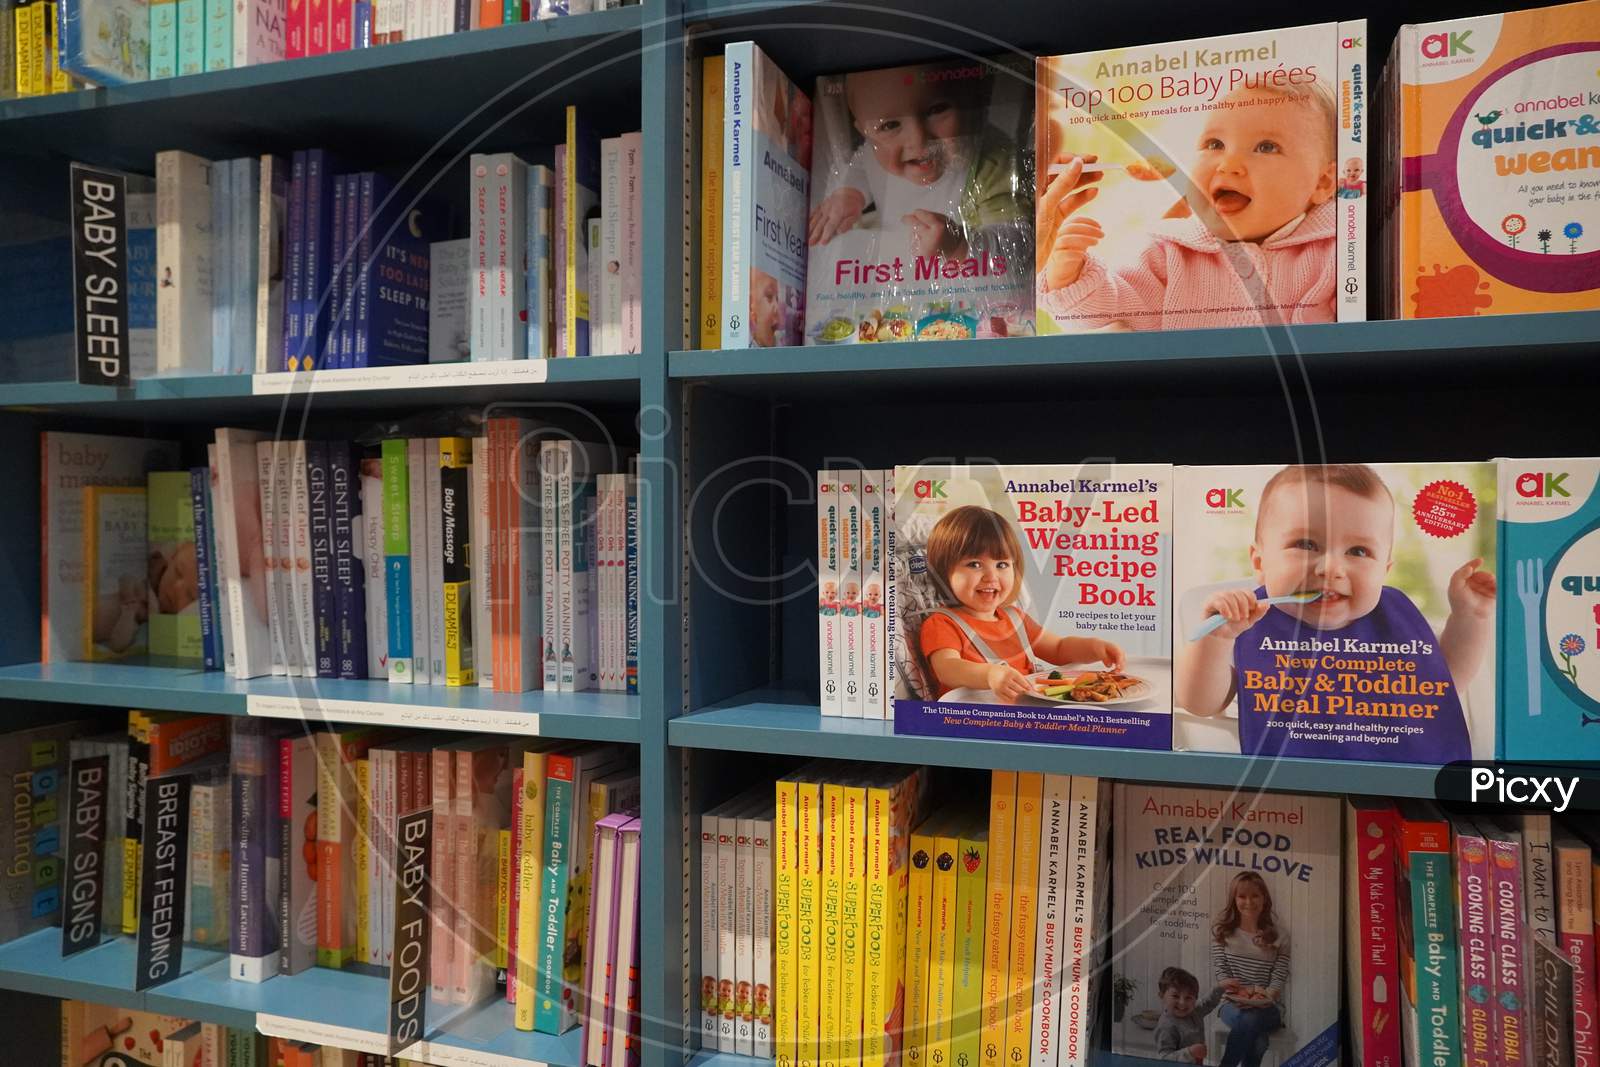 Bookshelf In Library With Many Parenting Books For Sale. Parenting, Toddler Guidebooks. Children Books. Toddler Books. What To Expect When You Are Expecting. Pregnancy Guide - Dubai Uae December 2019